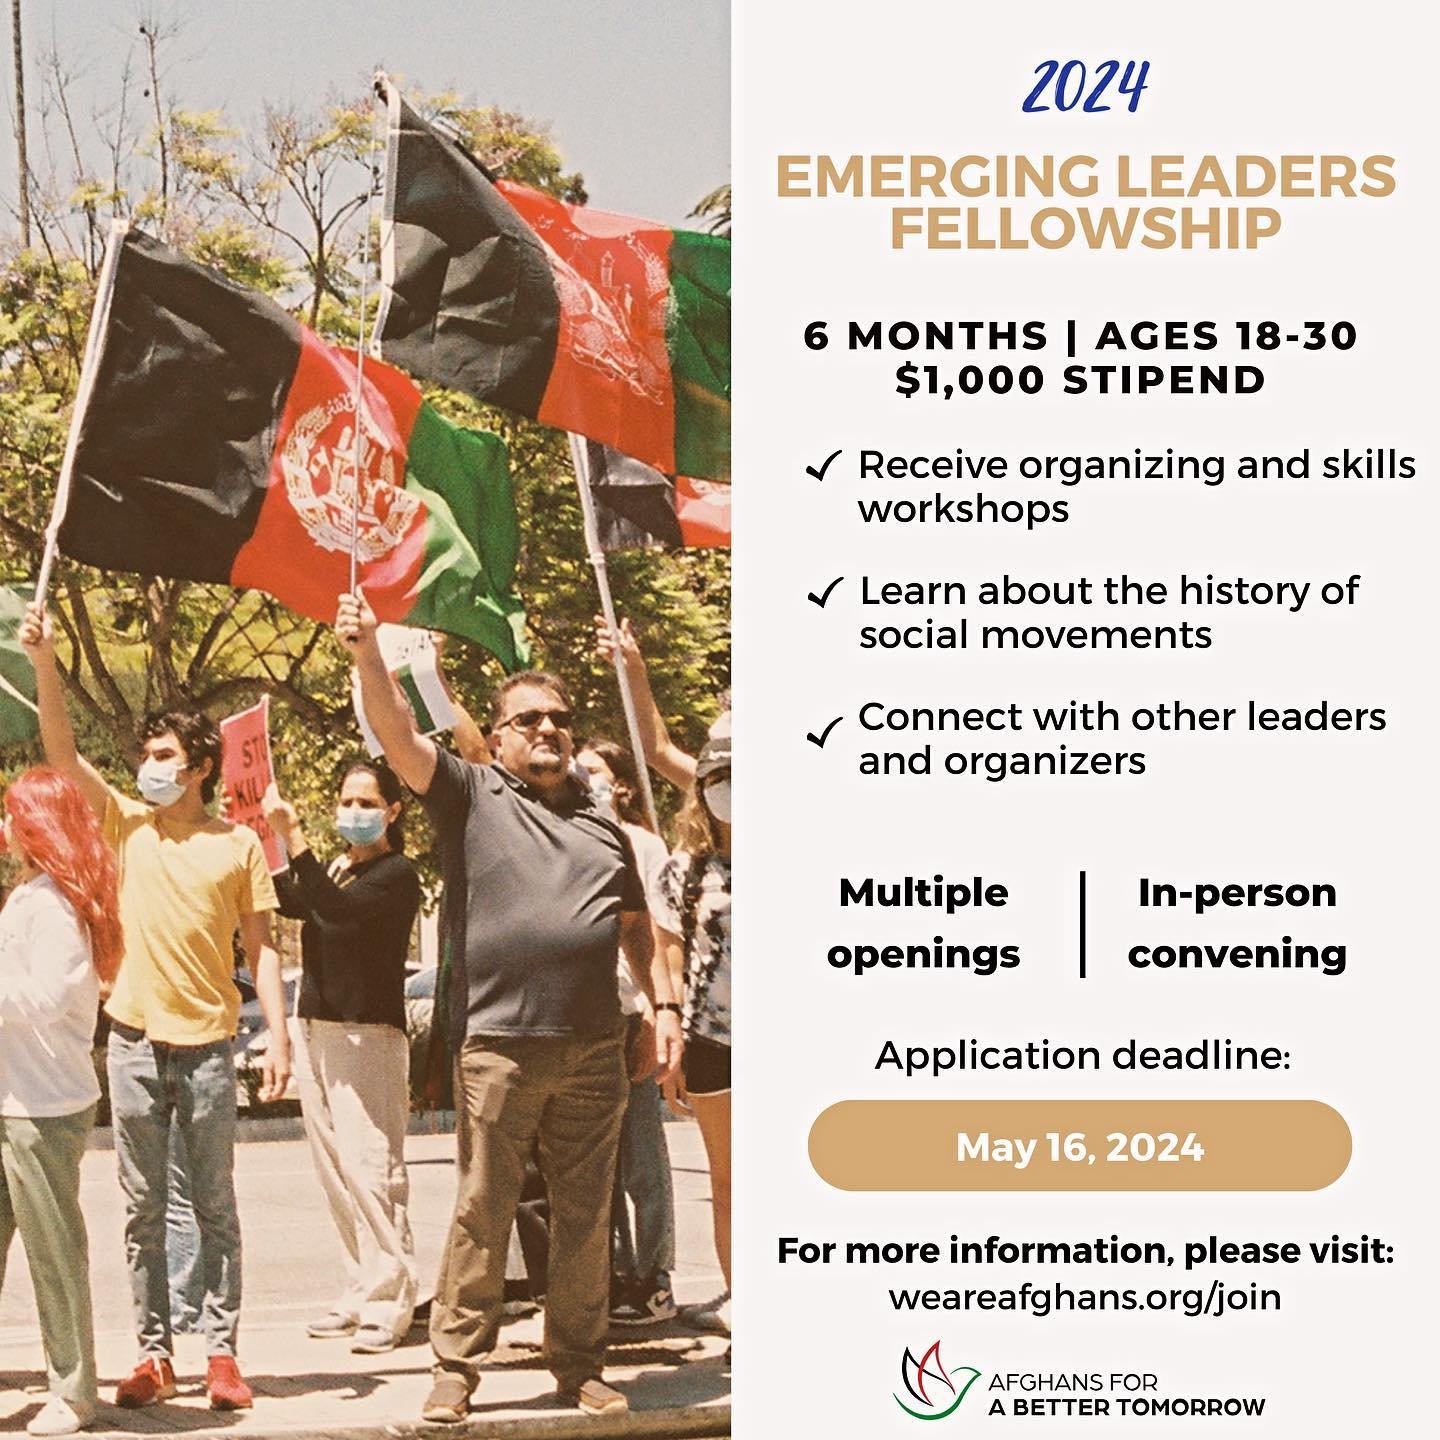 🚨 We are proud to announce the second year of our Emerging Leaders Fellowship ‼️

We invite young Afghan Americans to apply for our 6-month fellowship, for which you will receive a $1,000 stipend, as well as skills and community organizing workshops